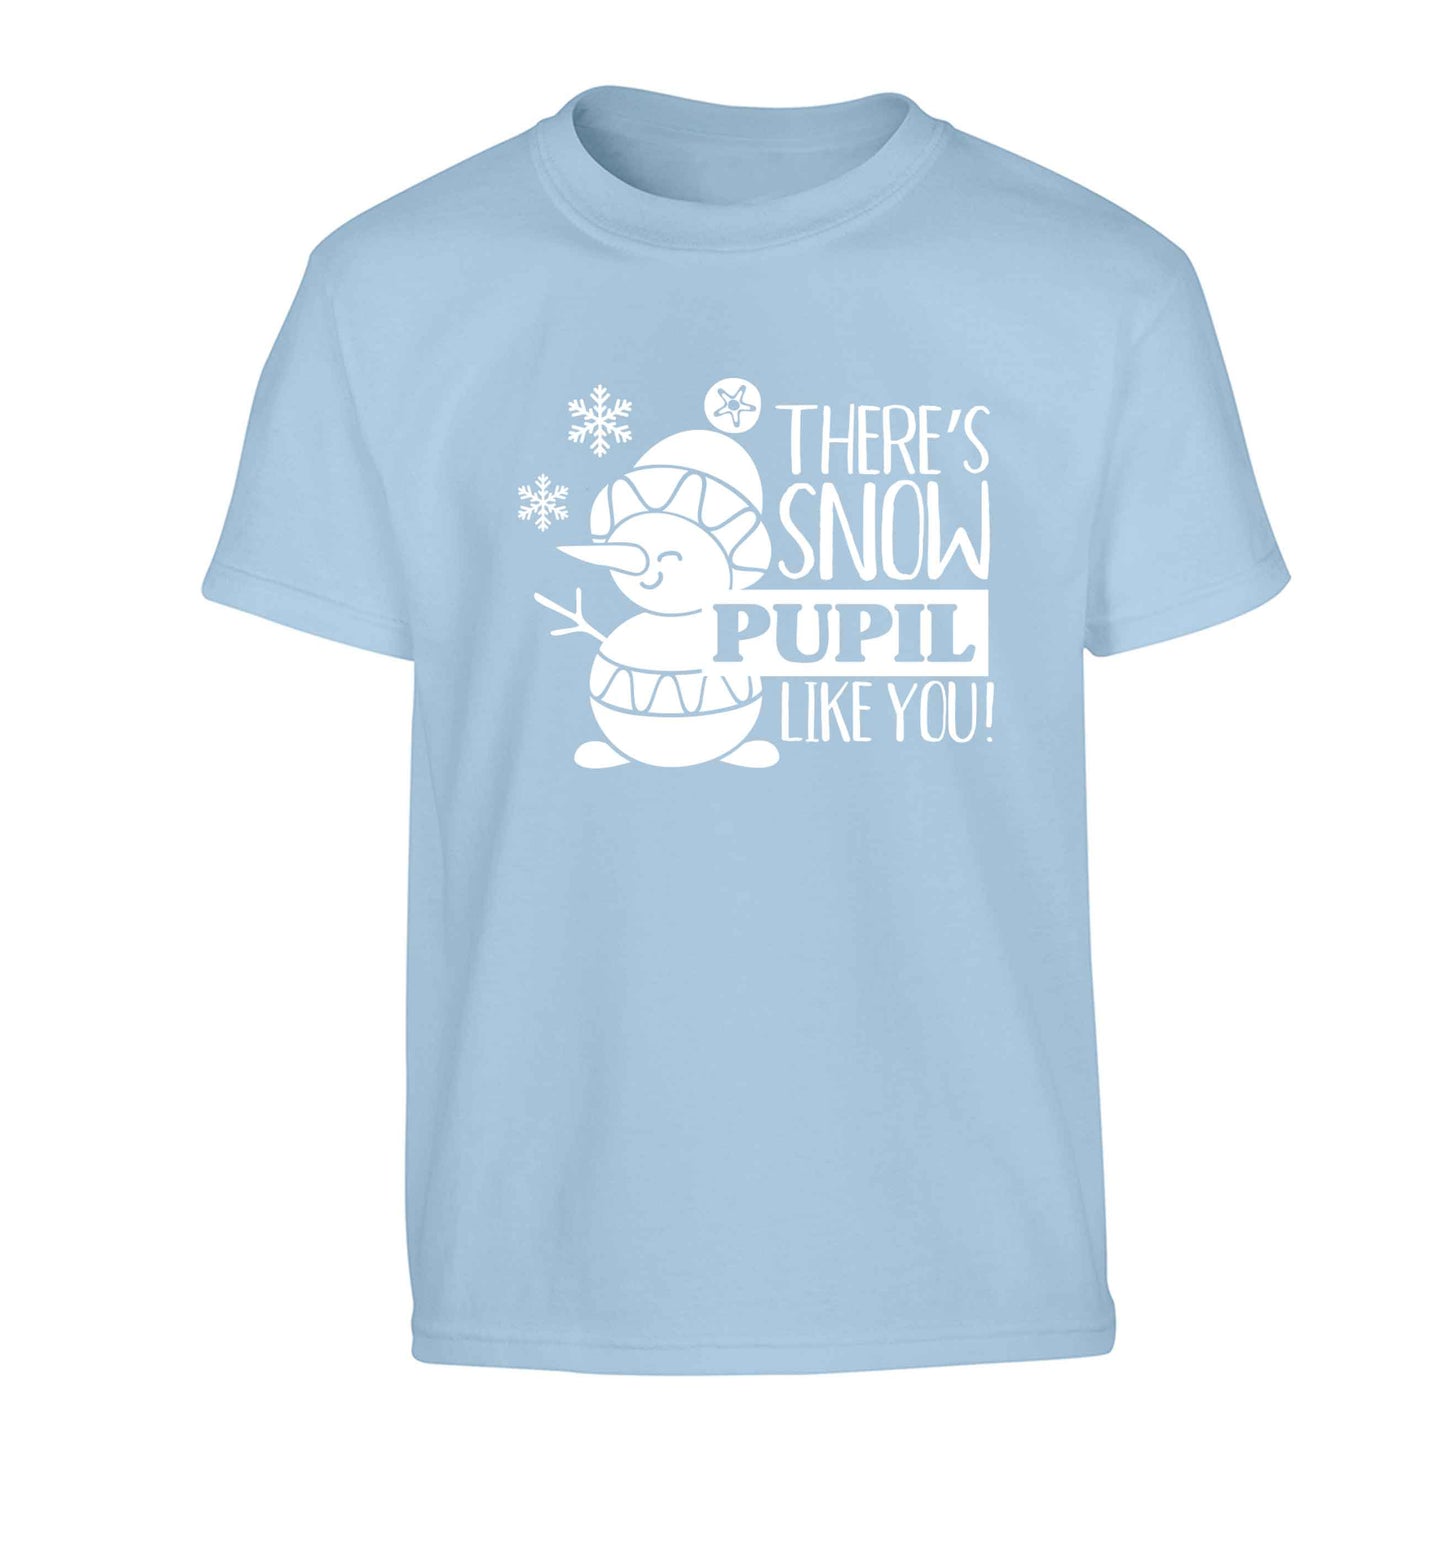 There's snow pupil like you Children's light blue Tshirt 12-13 Years